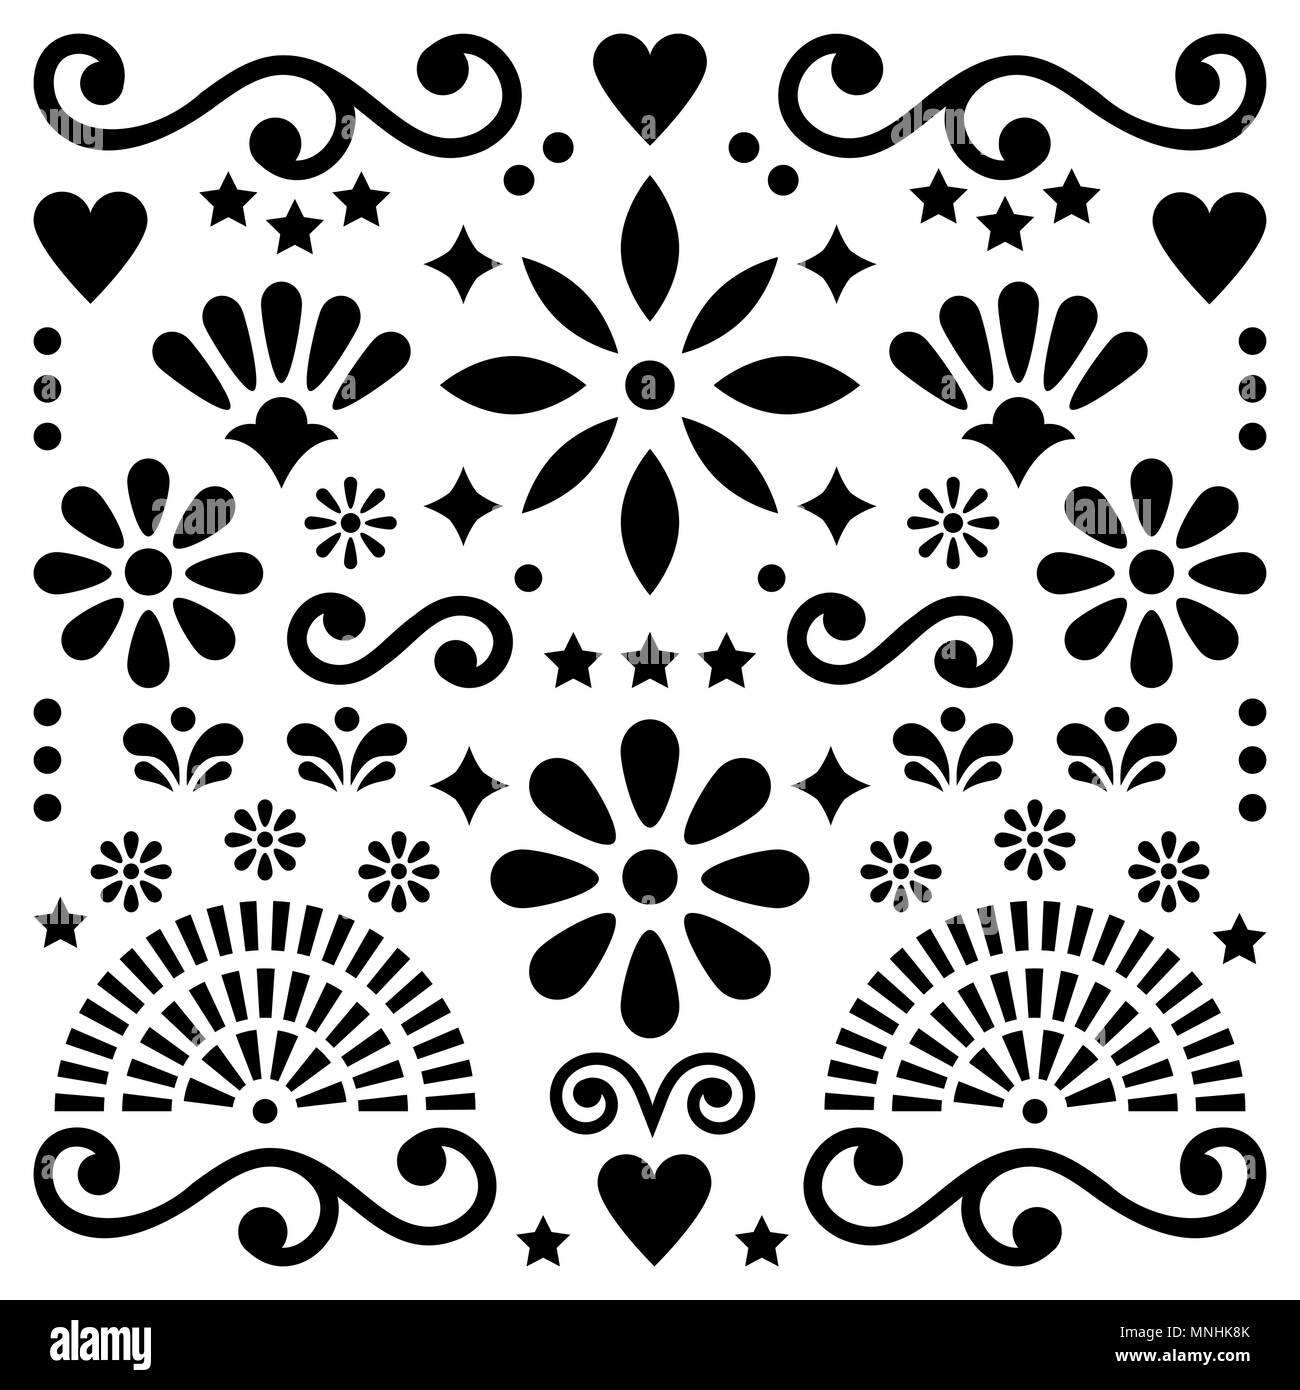 Mexican folk art vector pattern, black and white design with flowers greeting card inspired by traditional designs from Mexico Stock Vector